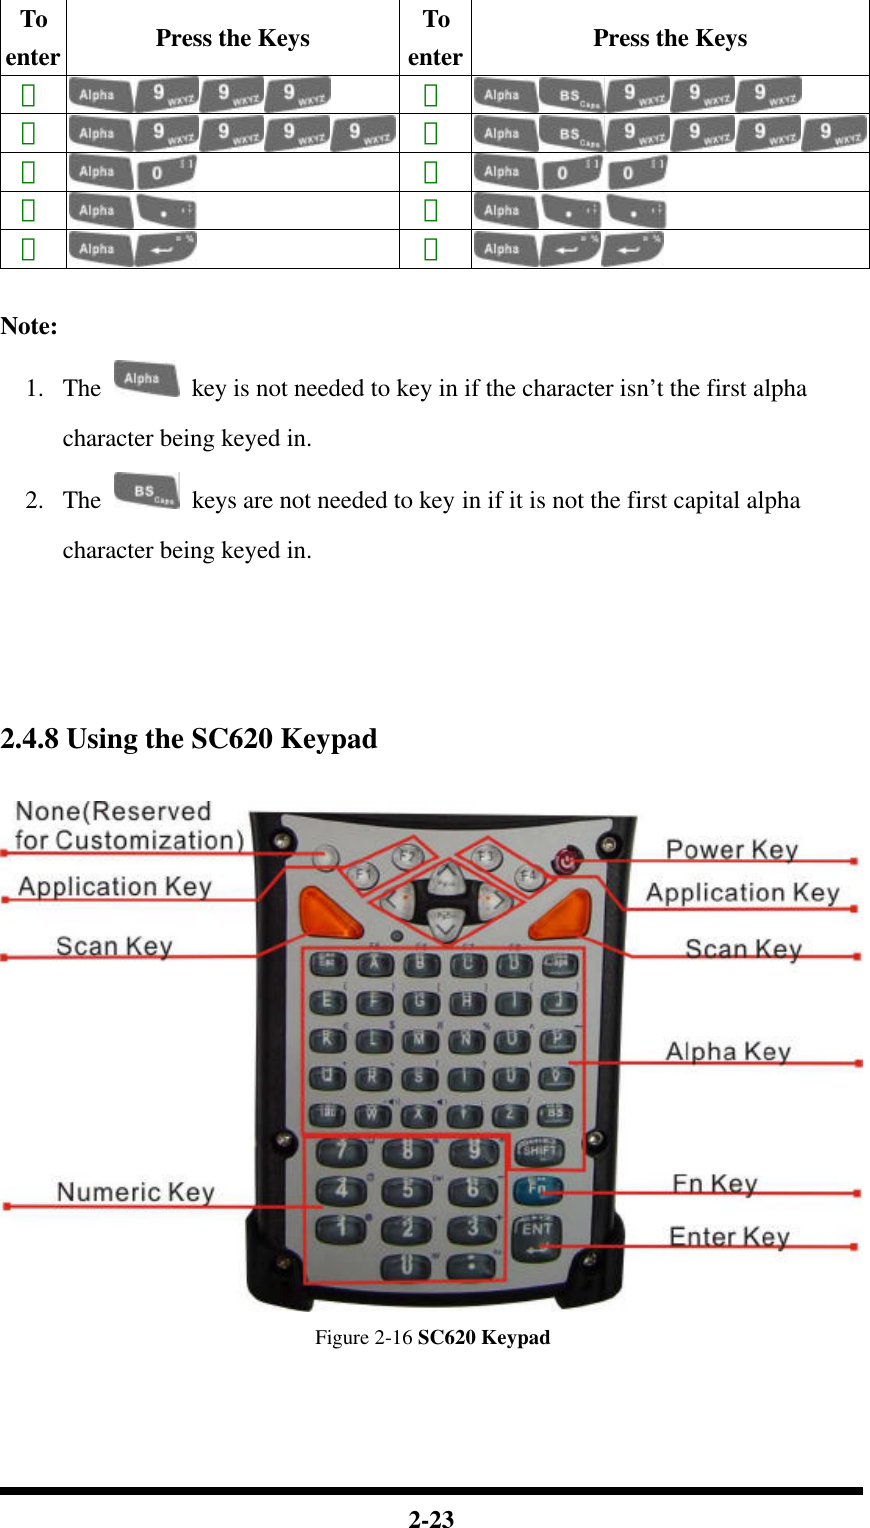  2-23 To enter Press the Keys To enter Press the Keys ｙ  Ｙ  ｚ  Ｚ  〔  〕  ，  ；  ＝  ％   Note: 1.  The   key is not needed to key in if the character isn’t the first alpha character being keyed in. 2.  The   keys are not needed to key in if it is not the first capital alpha character being keyed in.     2.4.8 Using the SC620 Keypad   Figure 2-16 SC620 Keypad   